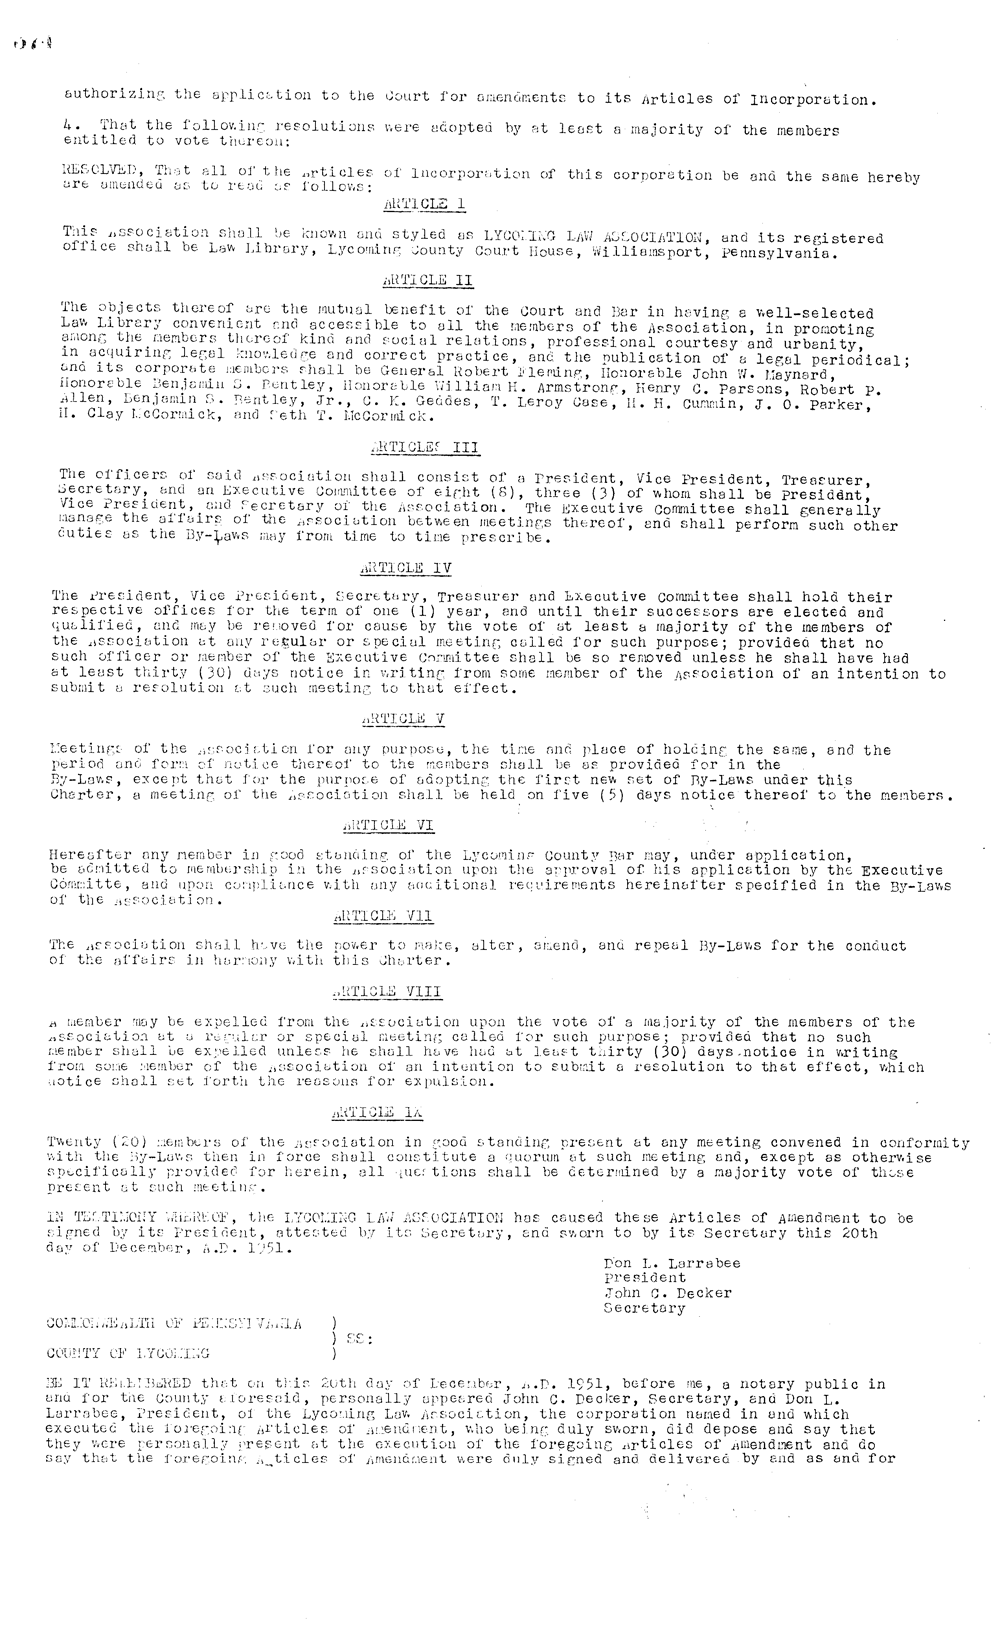 Charter 2, Page 3